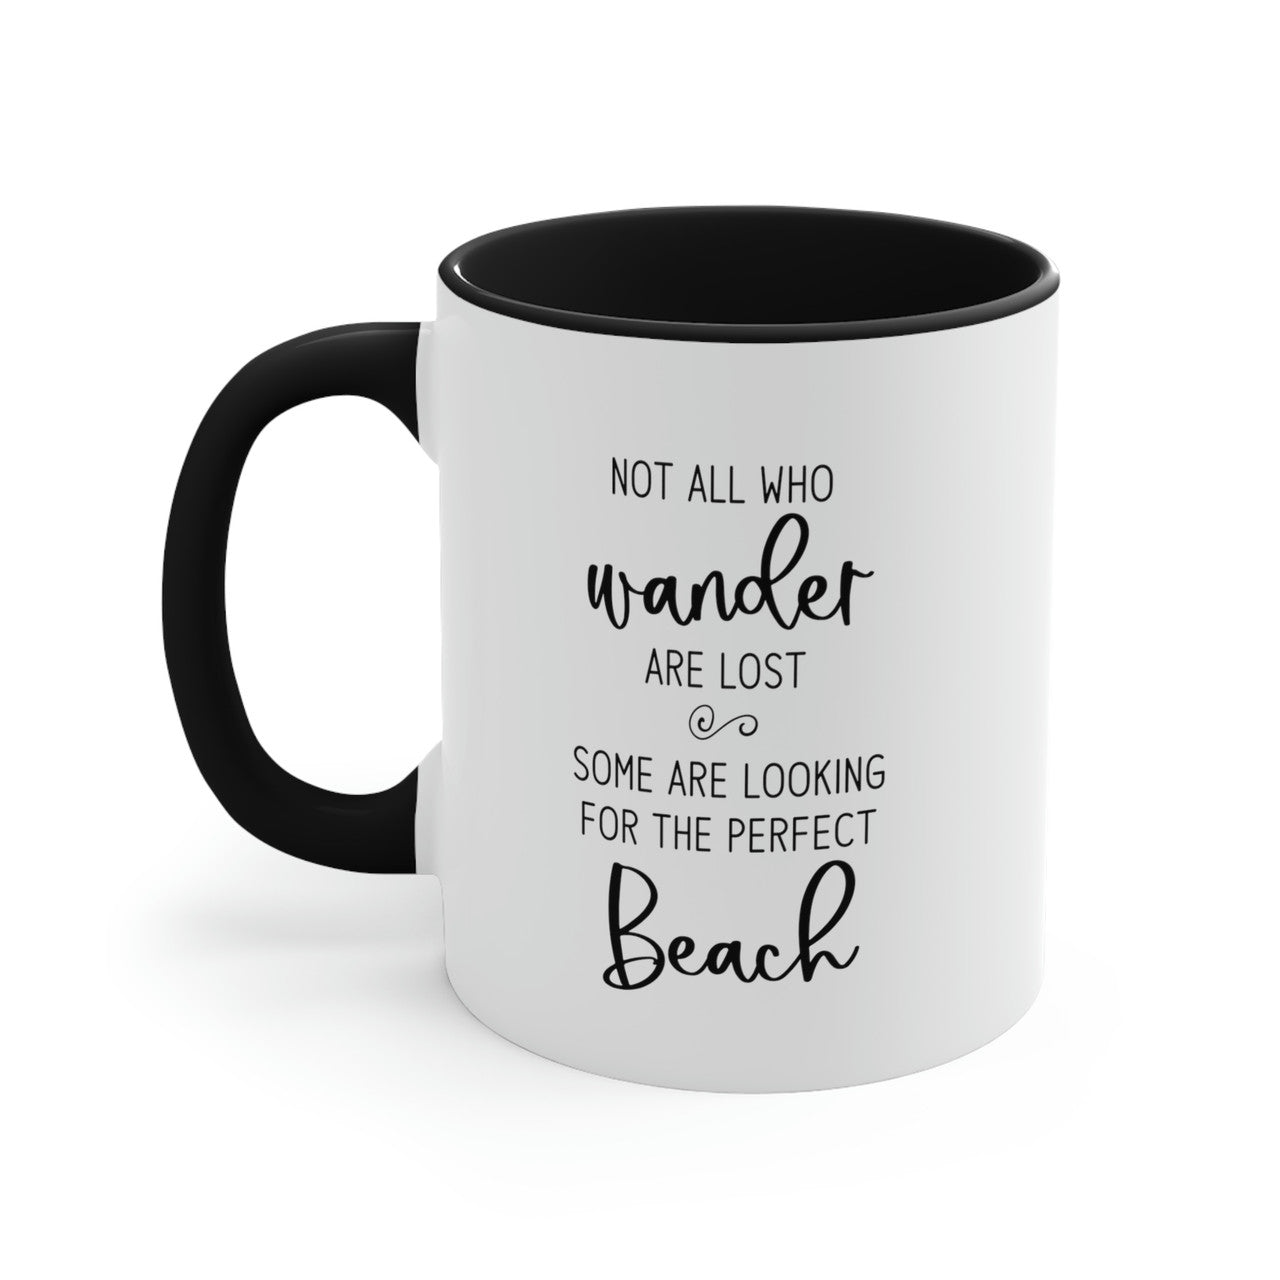 Not All Who Wander Are Lost Ceramic Beach Coffee Mug, 5 Colors Mugs New England Trading Co Black  